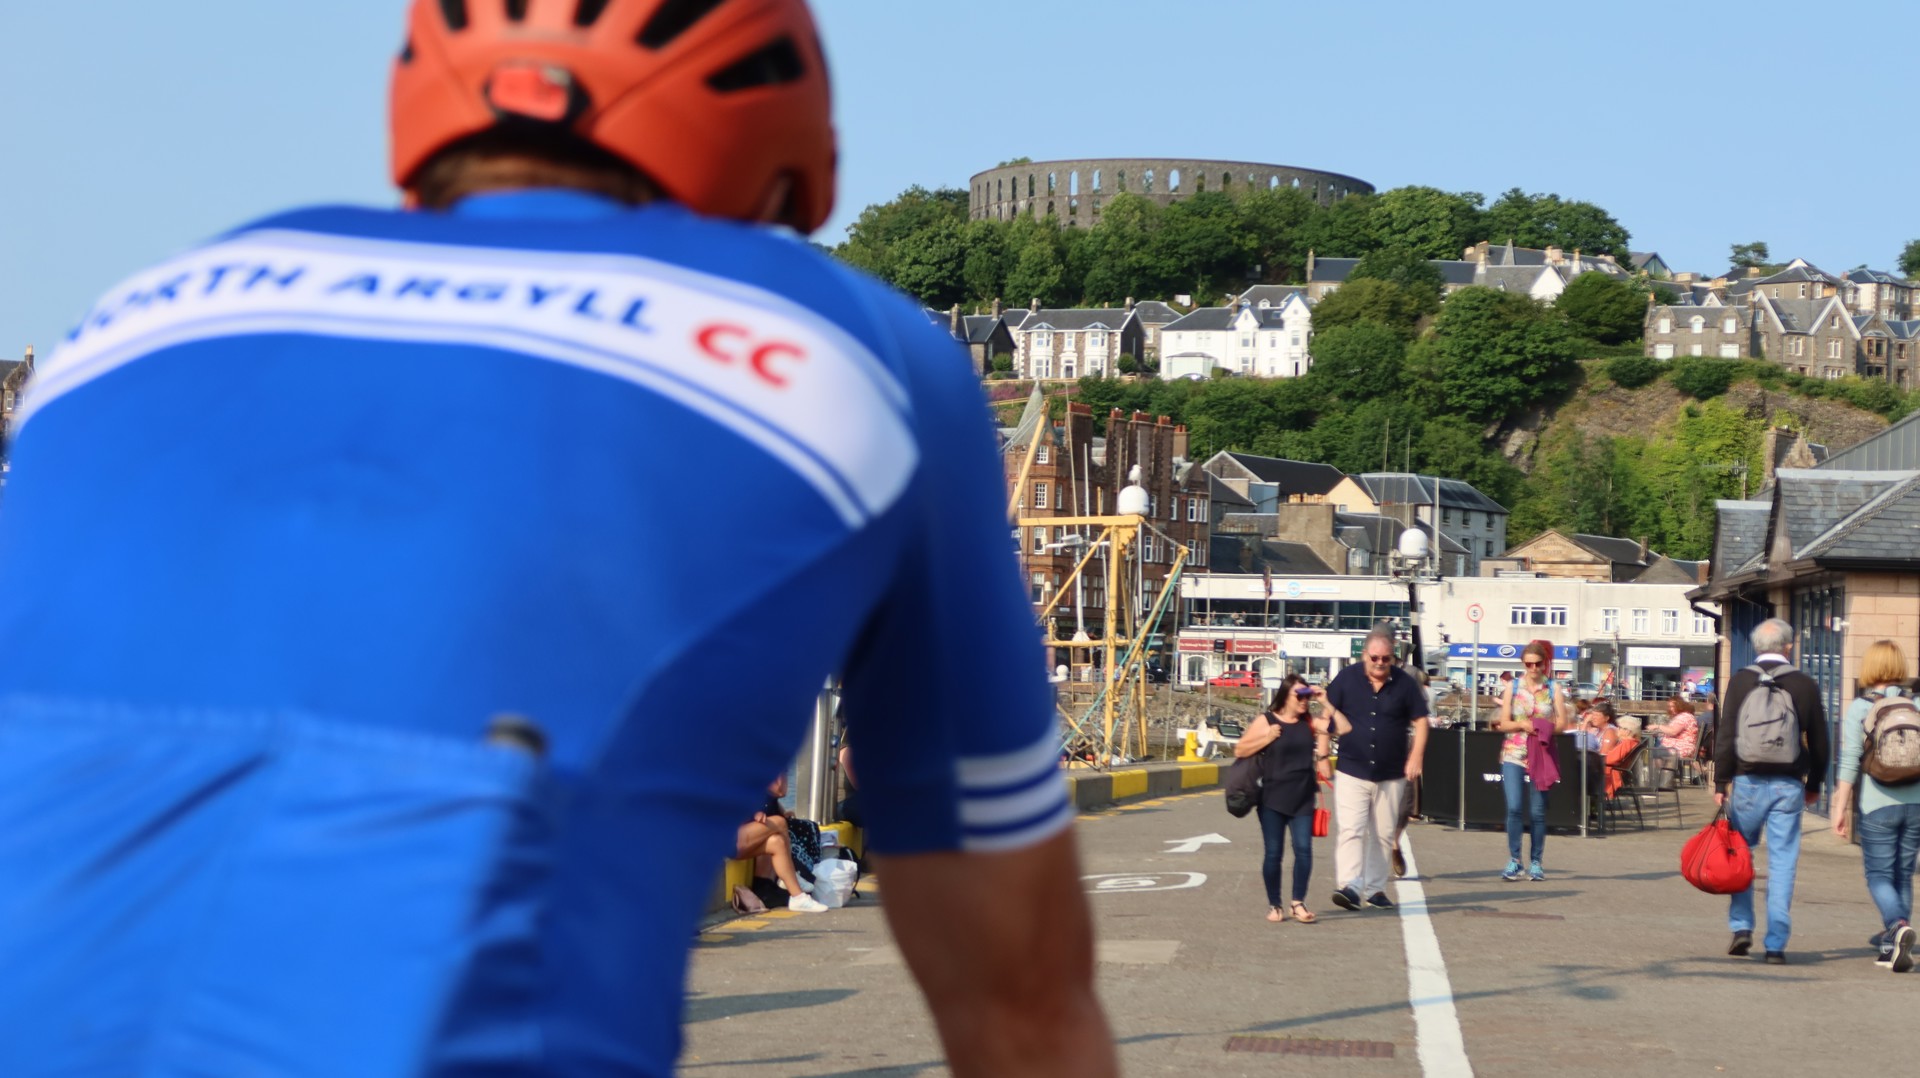 Background image - Cycle Oban Pier